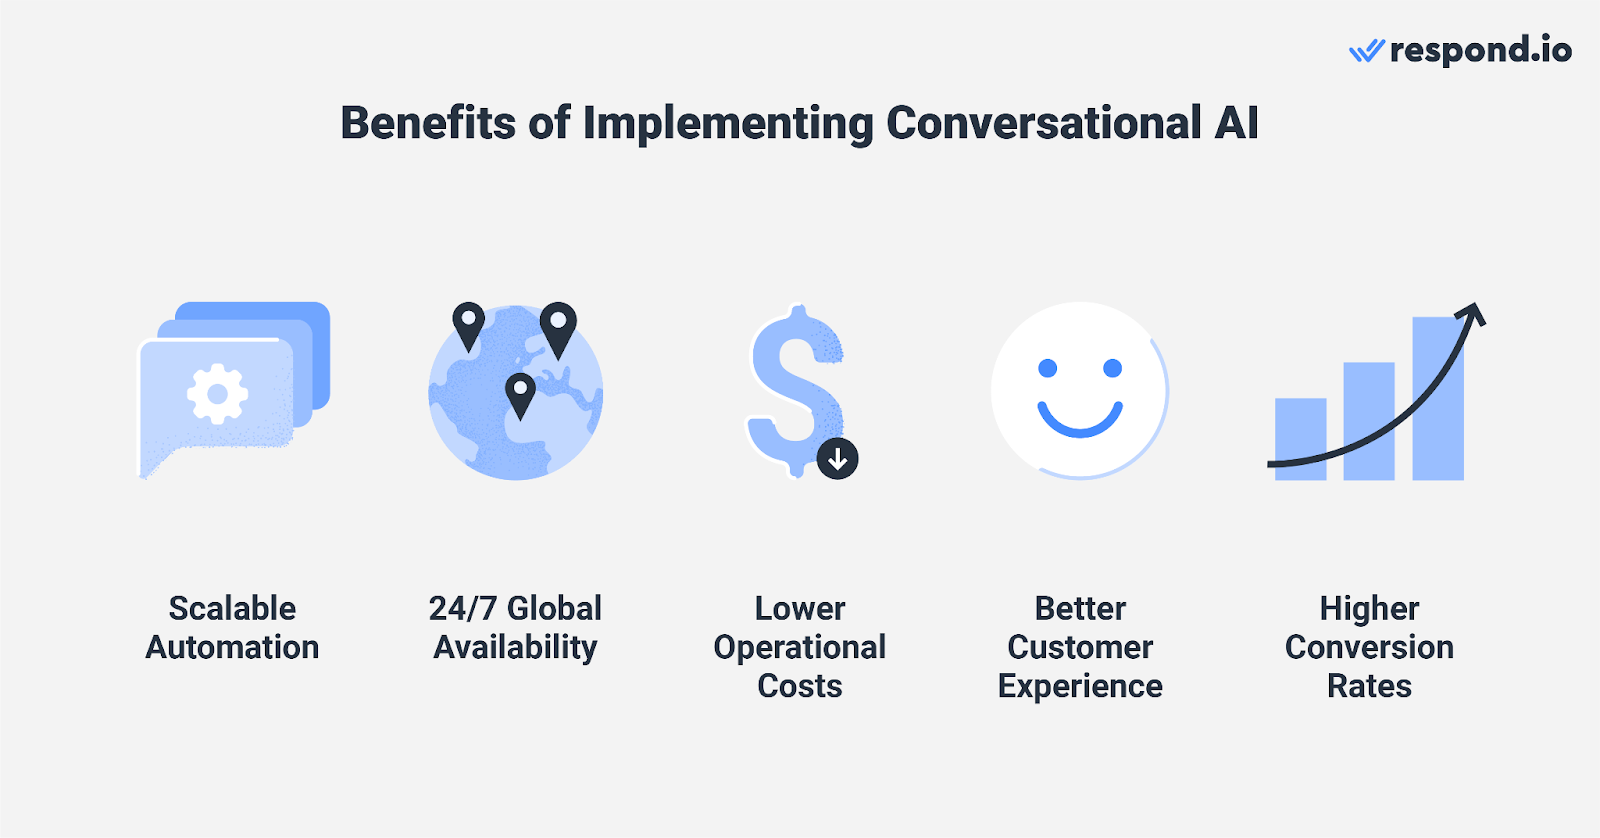 Benefits of implementing conversational AI